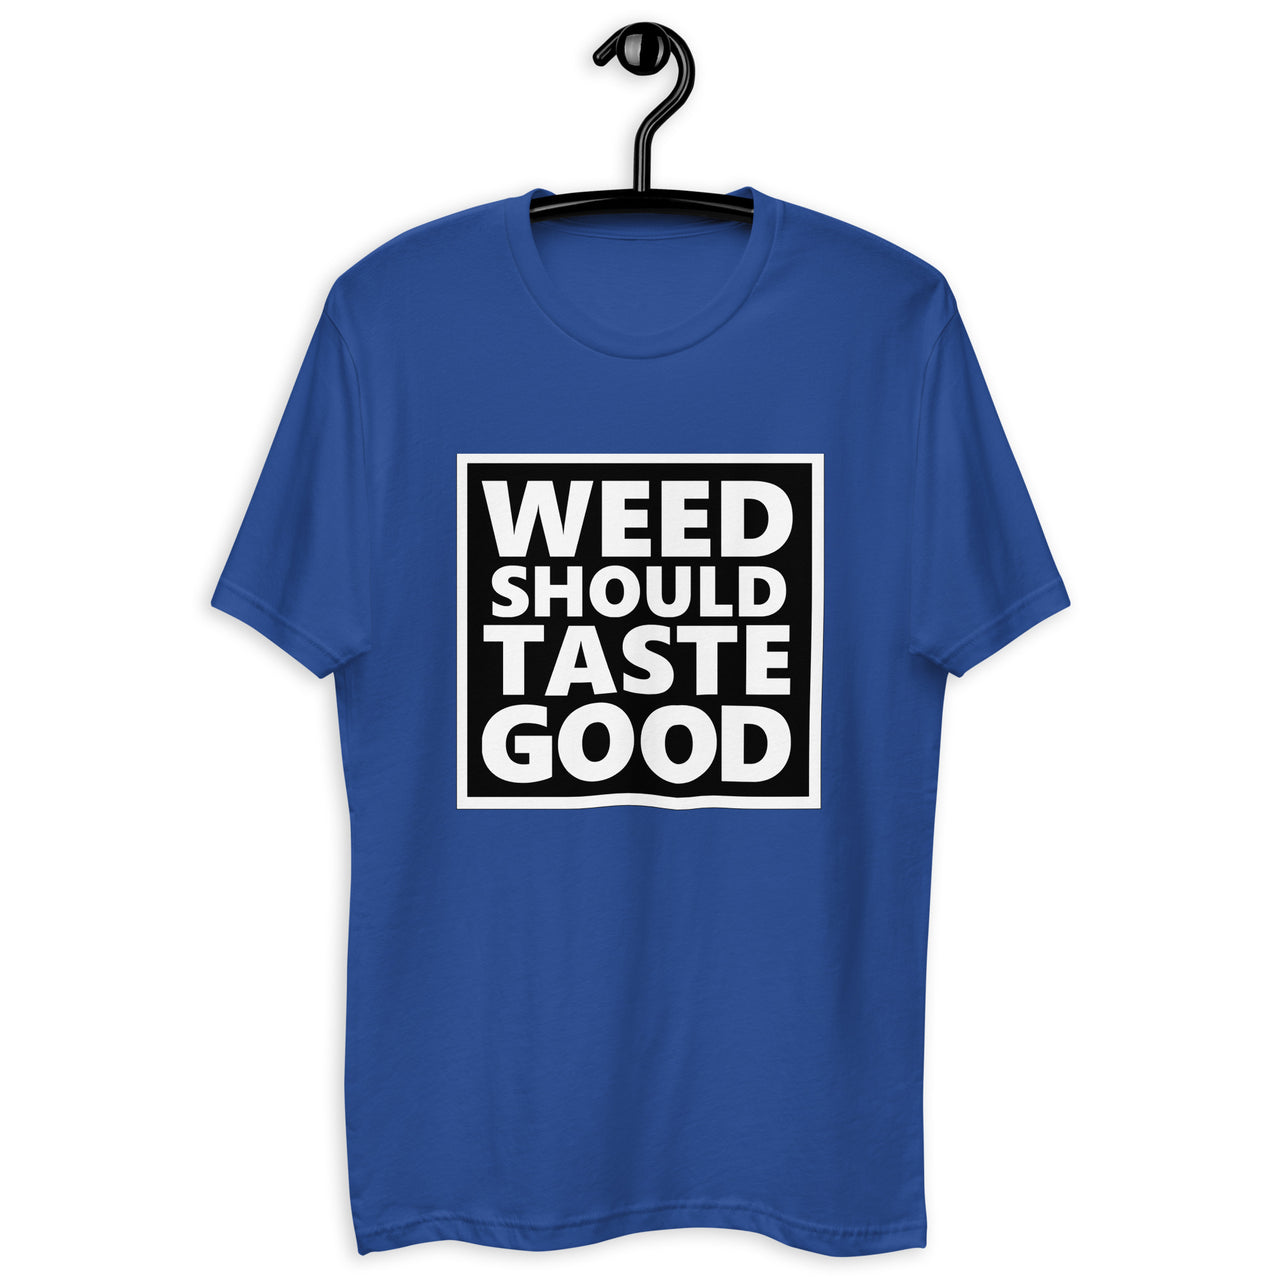 Weed Should Taste Good Fitted Next Level T-shirt